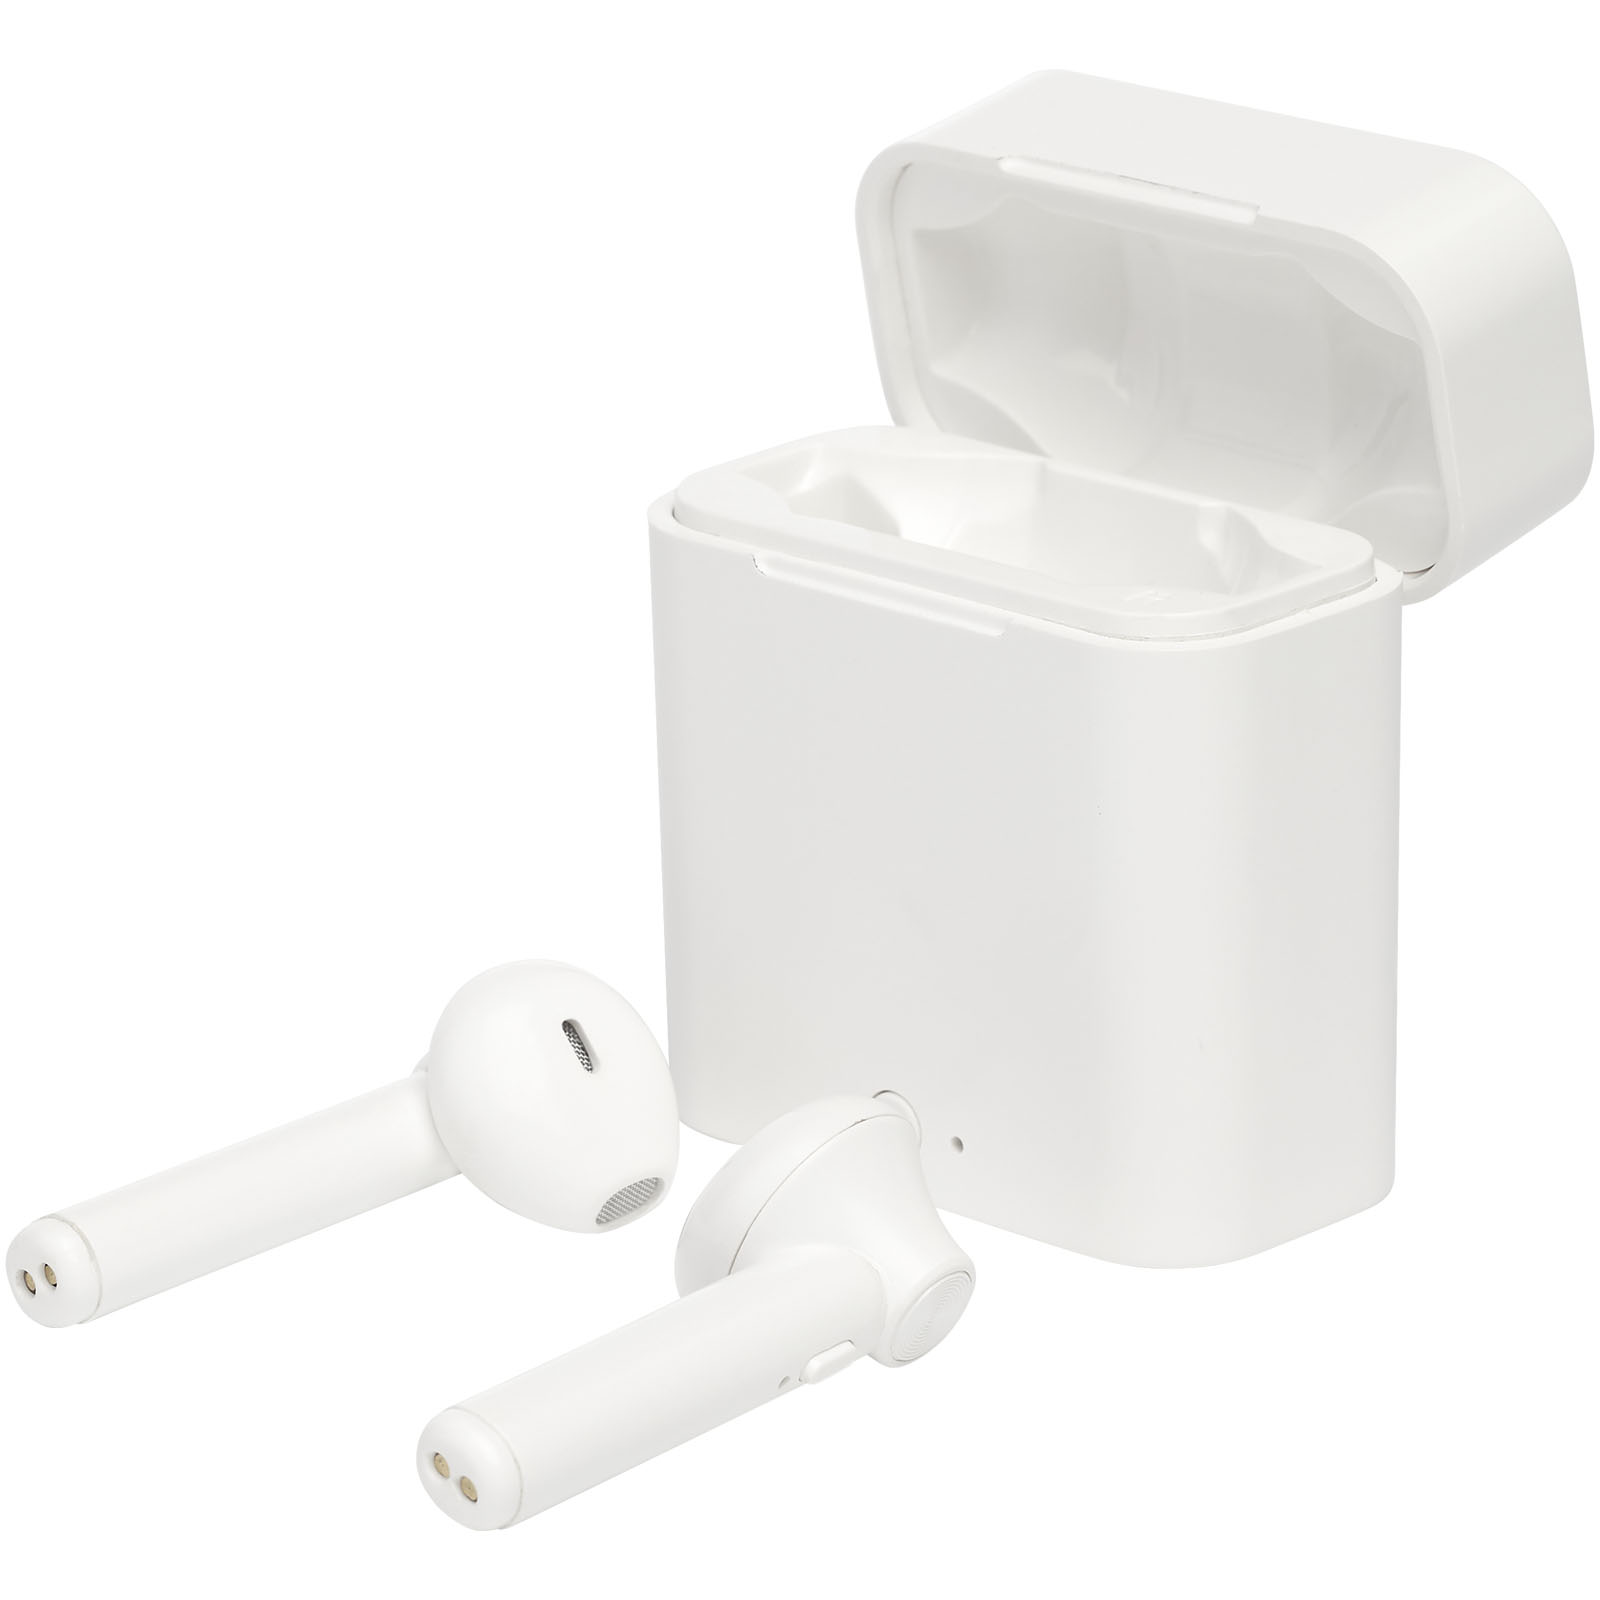 UVC True Wireless Ergonomic Earbuds with Auto Pair and Sanitizing Charging Case - Aldbourne